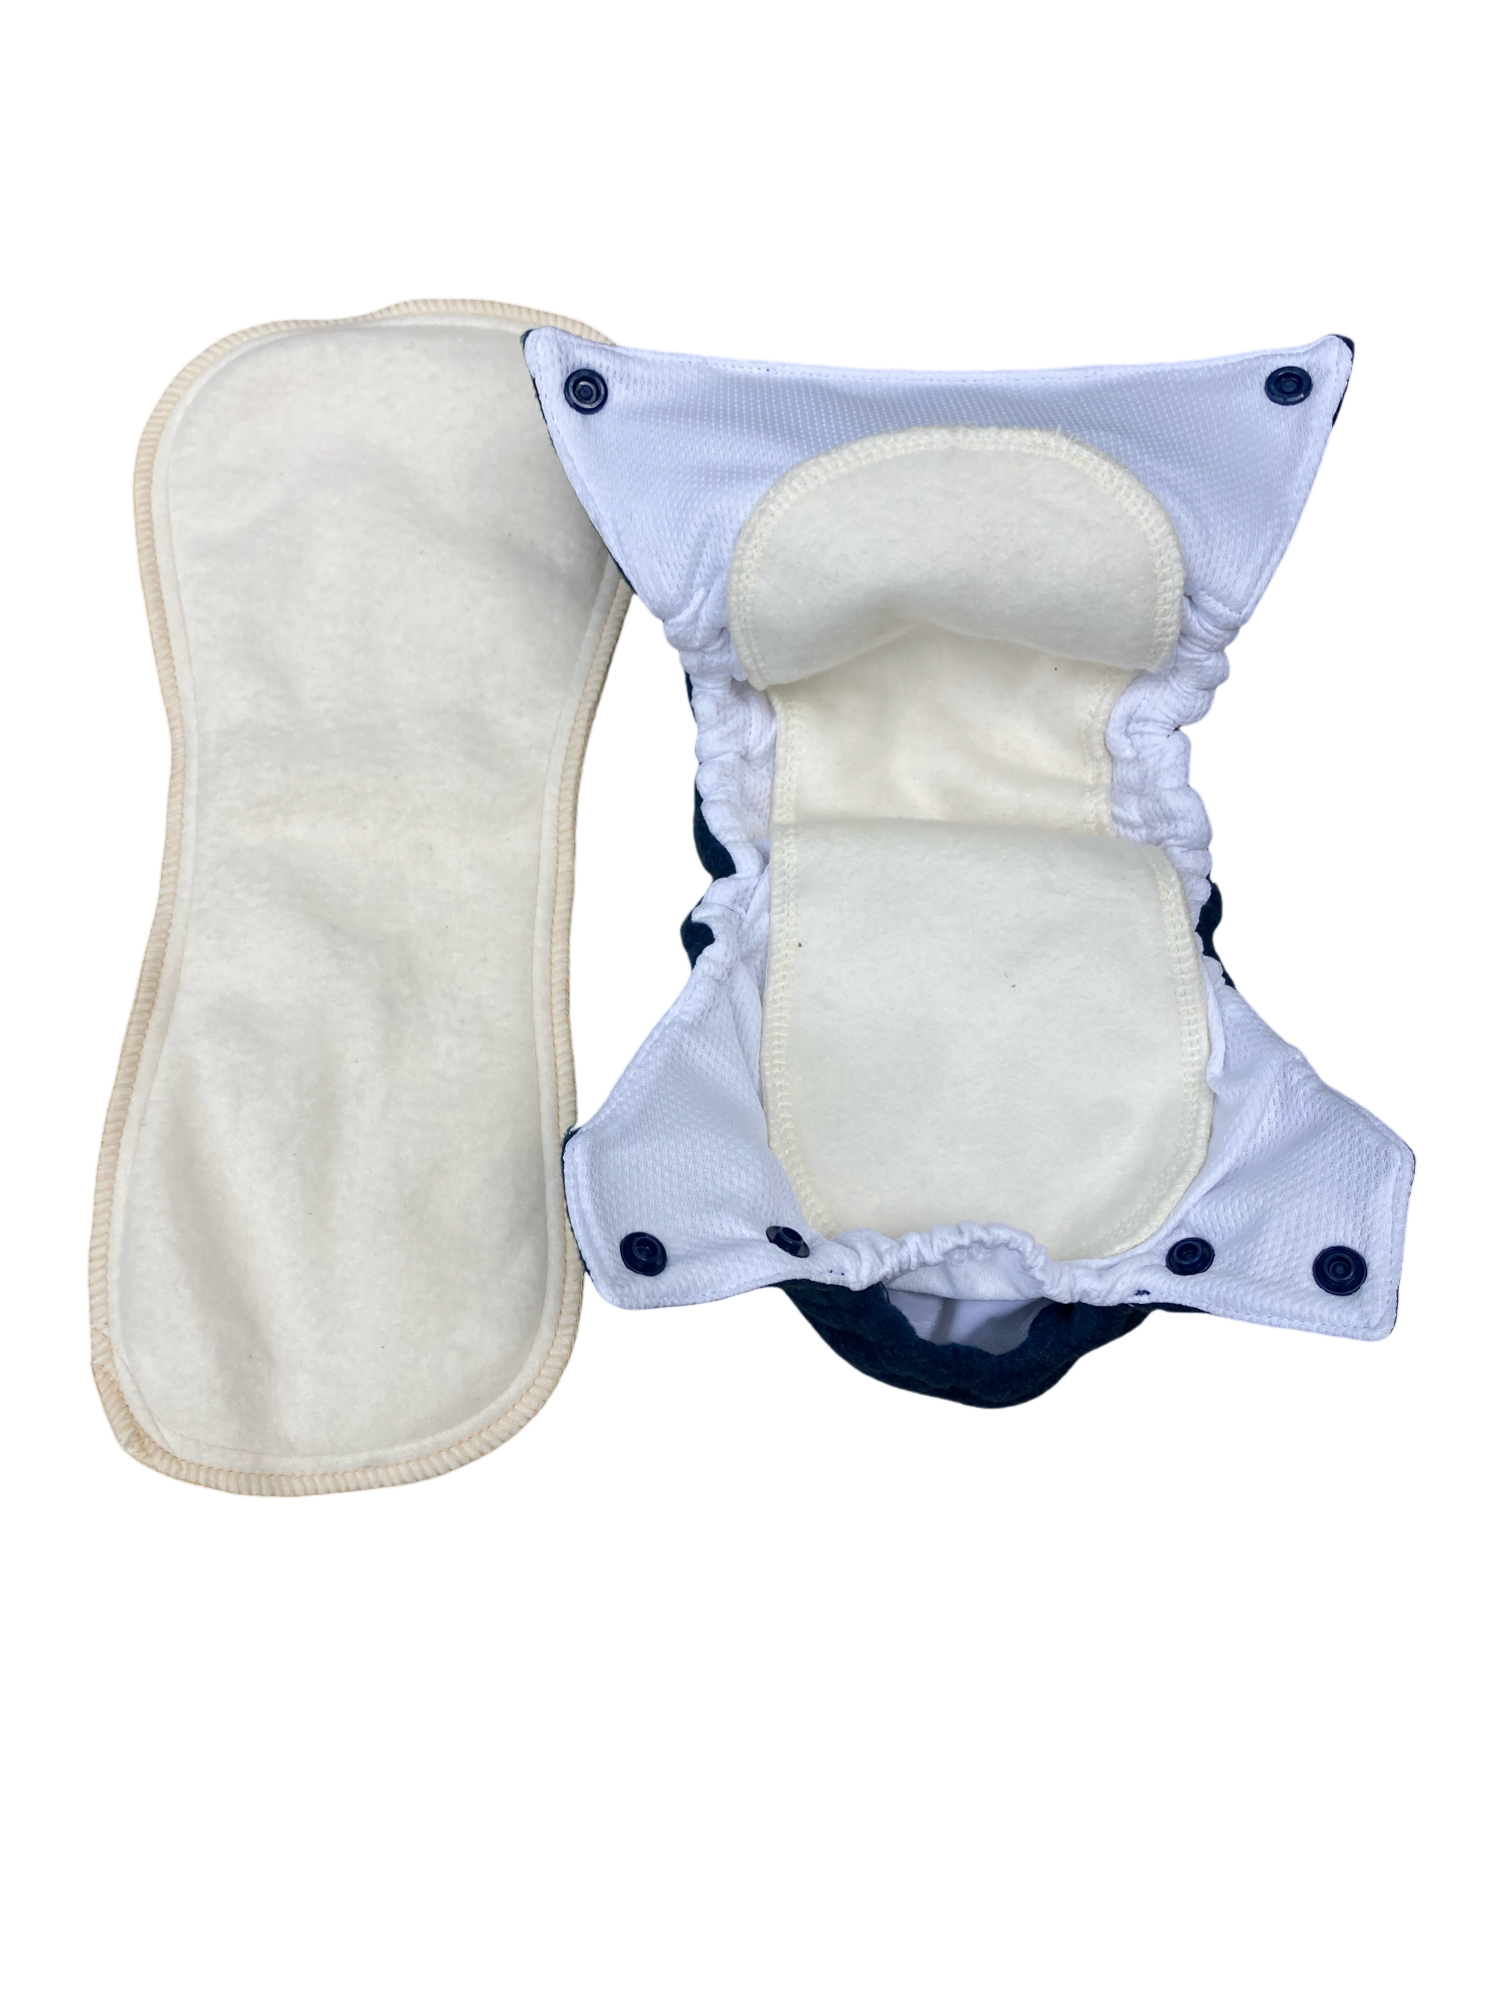 Pocket Diaper Inserts:  Pack of 6 Pads